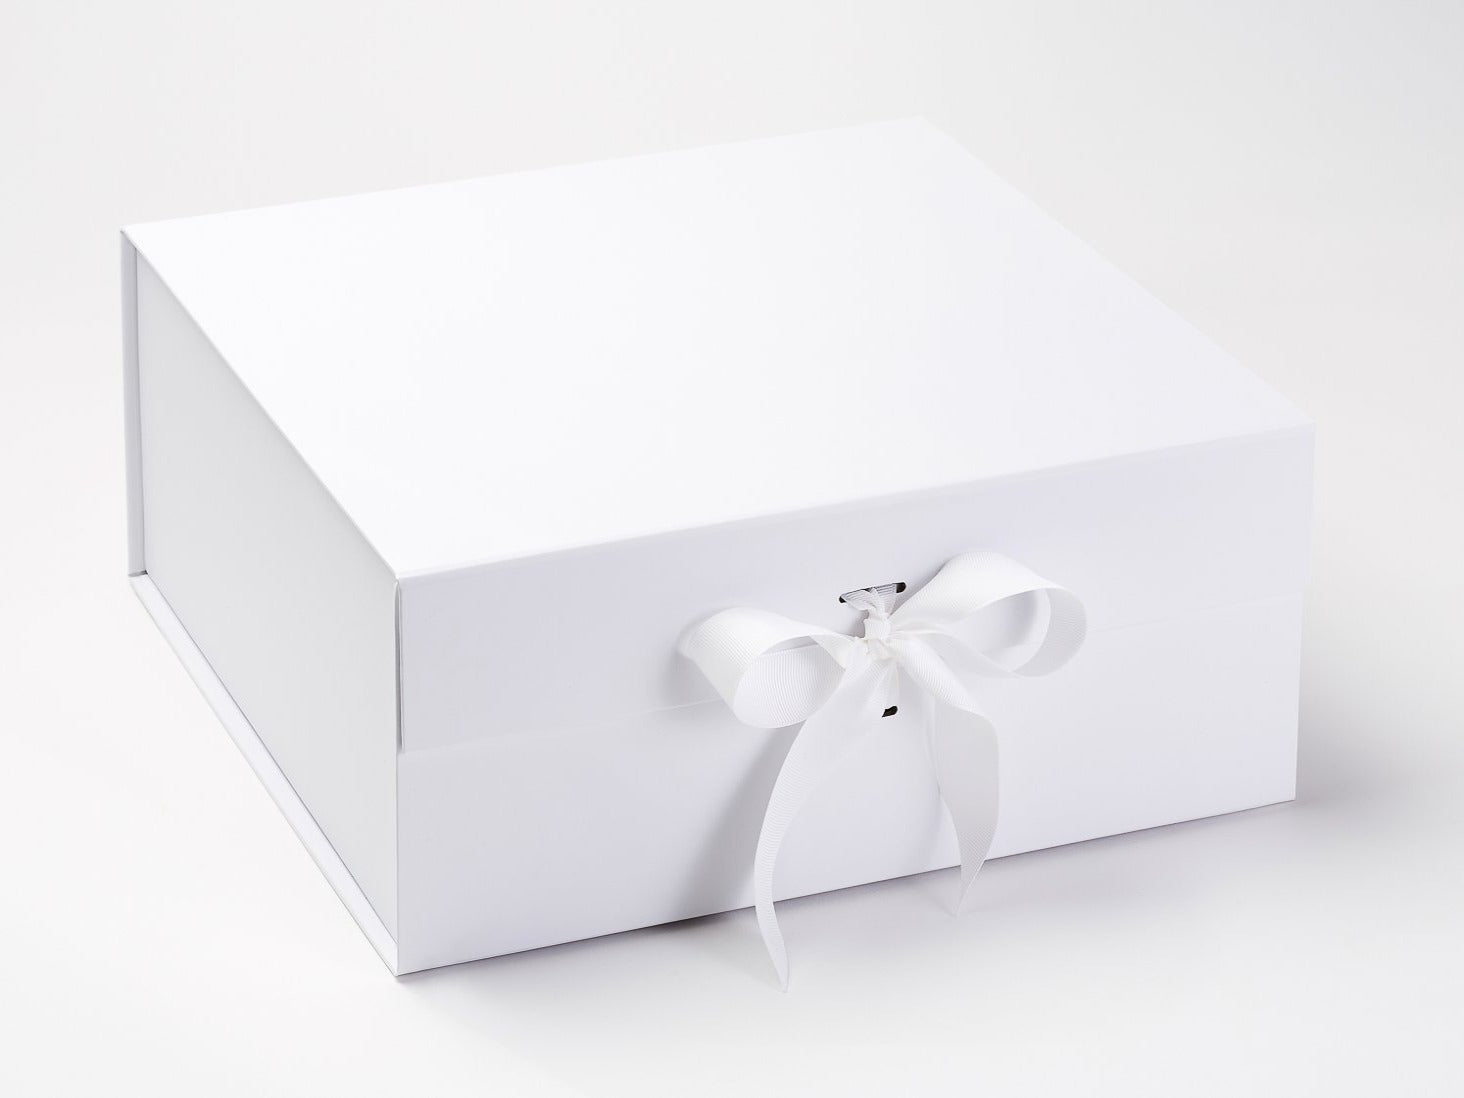 Pale Blue A5 Luxury Gift Boxes for Wholesale Luxury Packaging - FoldaBox USA